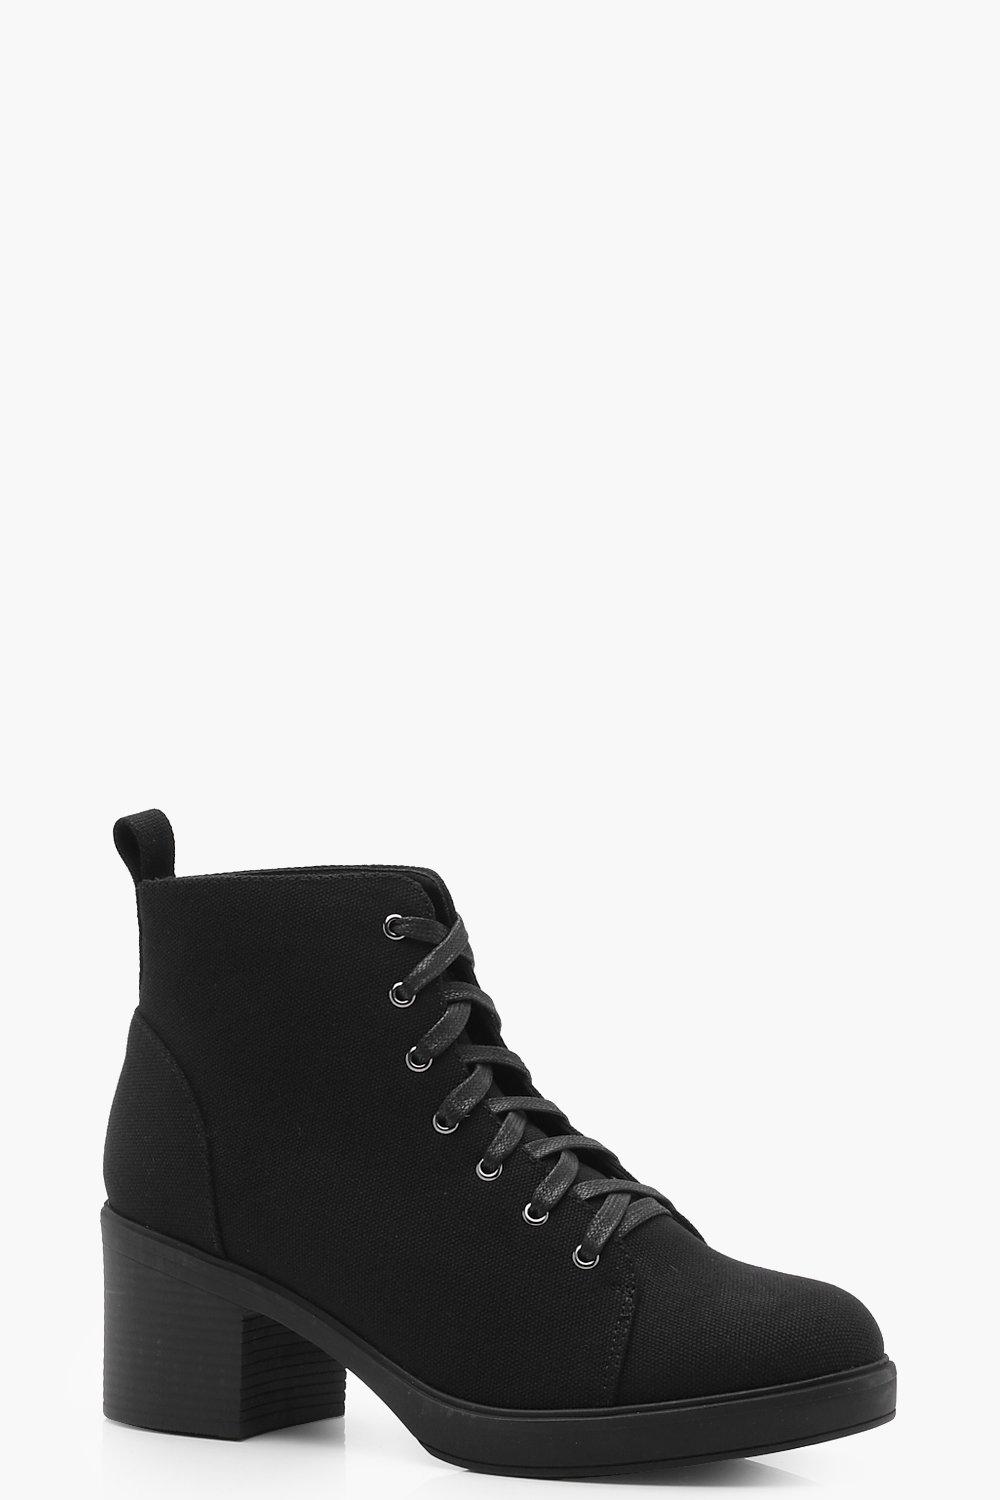 canvas ankle boots uk